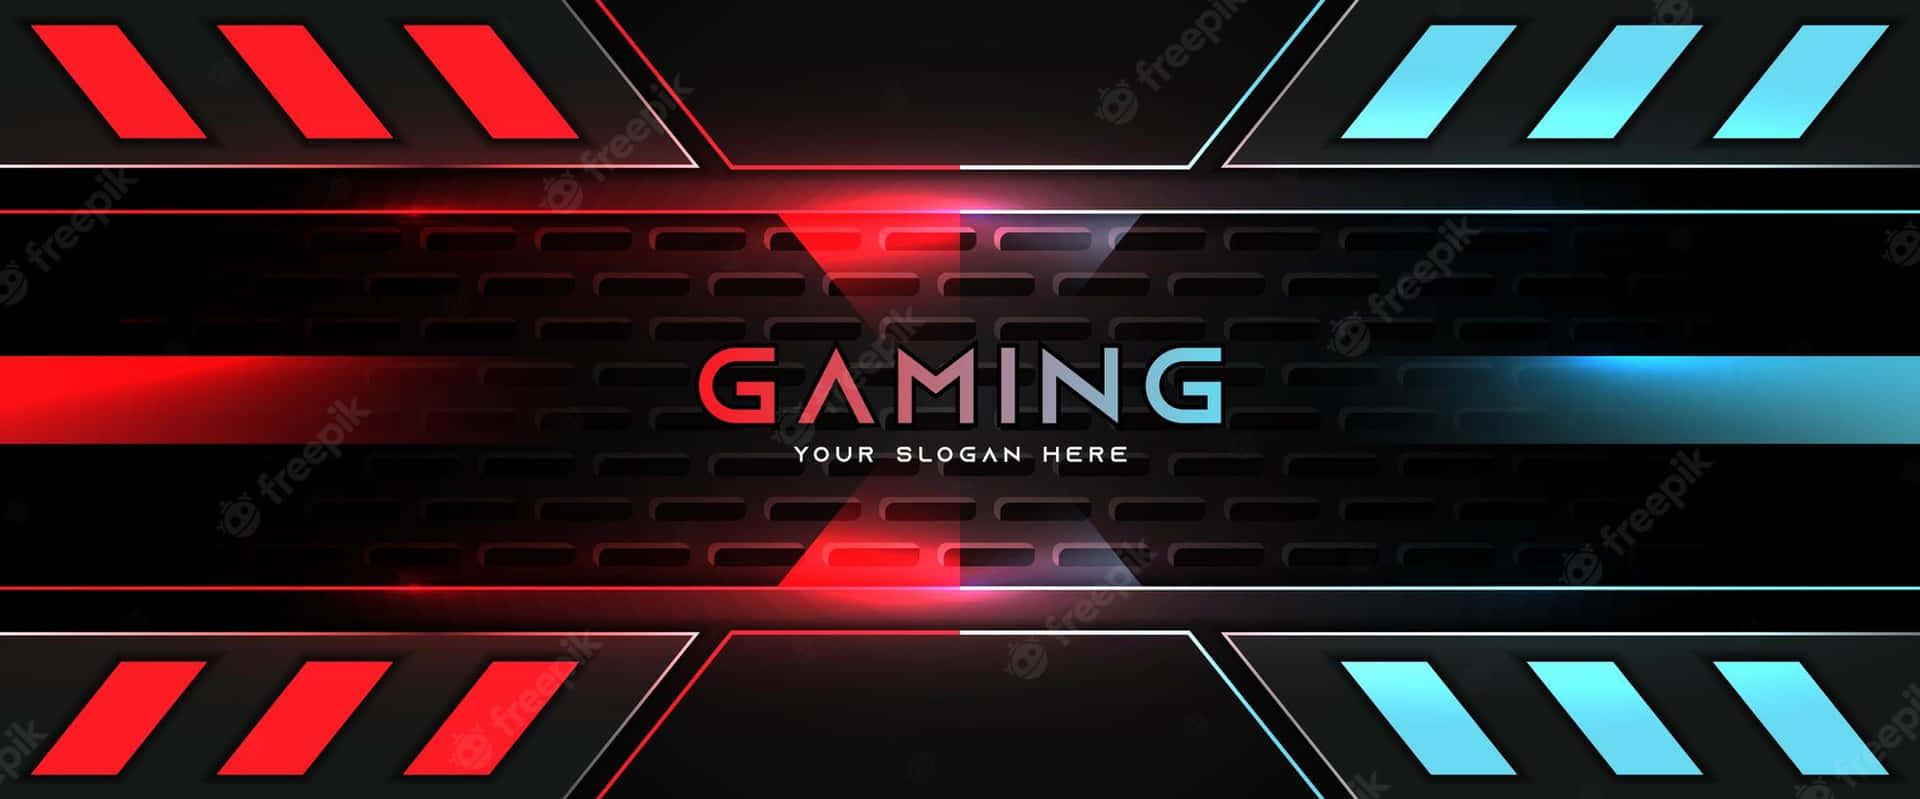 Download Gaming Background With Red And Blue Stripes Wallpaper